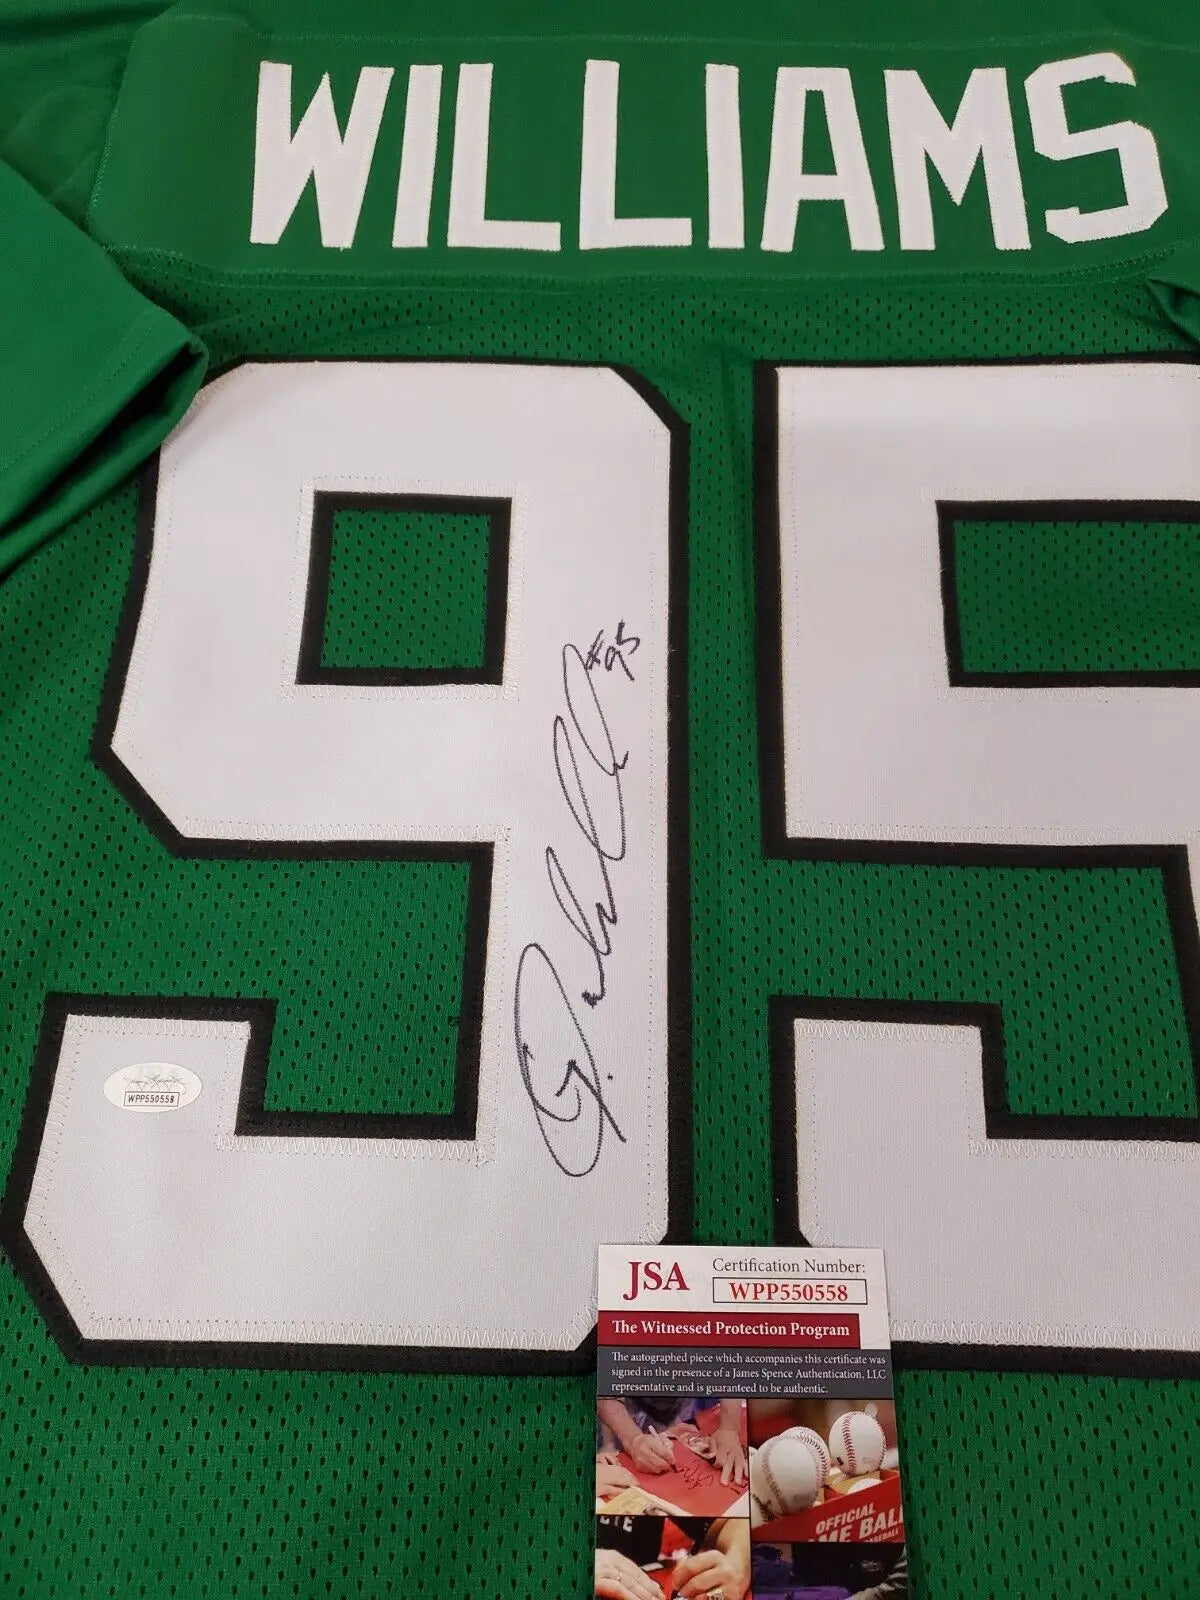 MVP Authentics N.Y. Jets Quinnen Williams Autographed Signed Jersey Jsa Coa 117 sports jersey framing , jersey framing